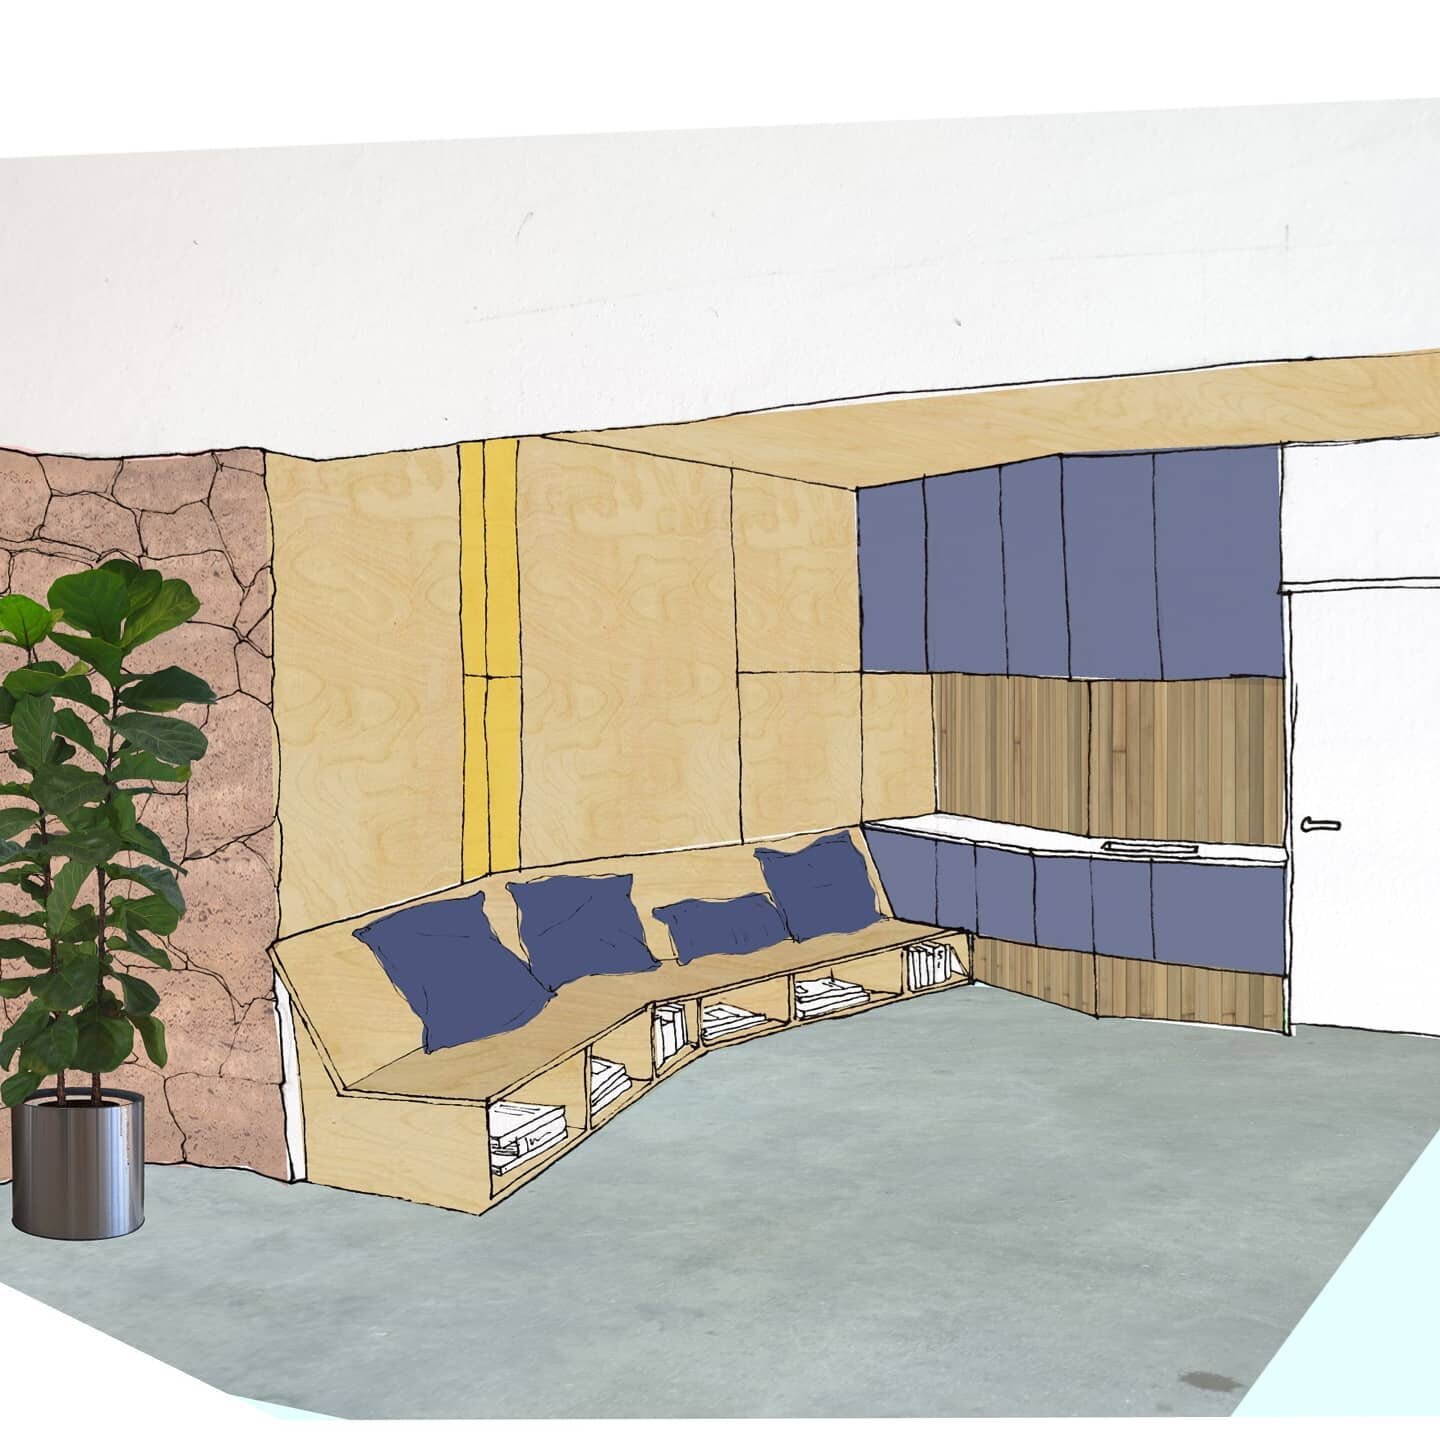 Experimenting with some bold colour blocking for the renovation of a cosy movie room for some clients in Auckland.
.
.
.
#dontmoveimprove #architecturaldesign #interiordesign #sketch #architecturalsketches #nzarchitecture #boldcolours #architectdesig